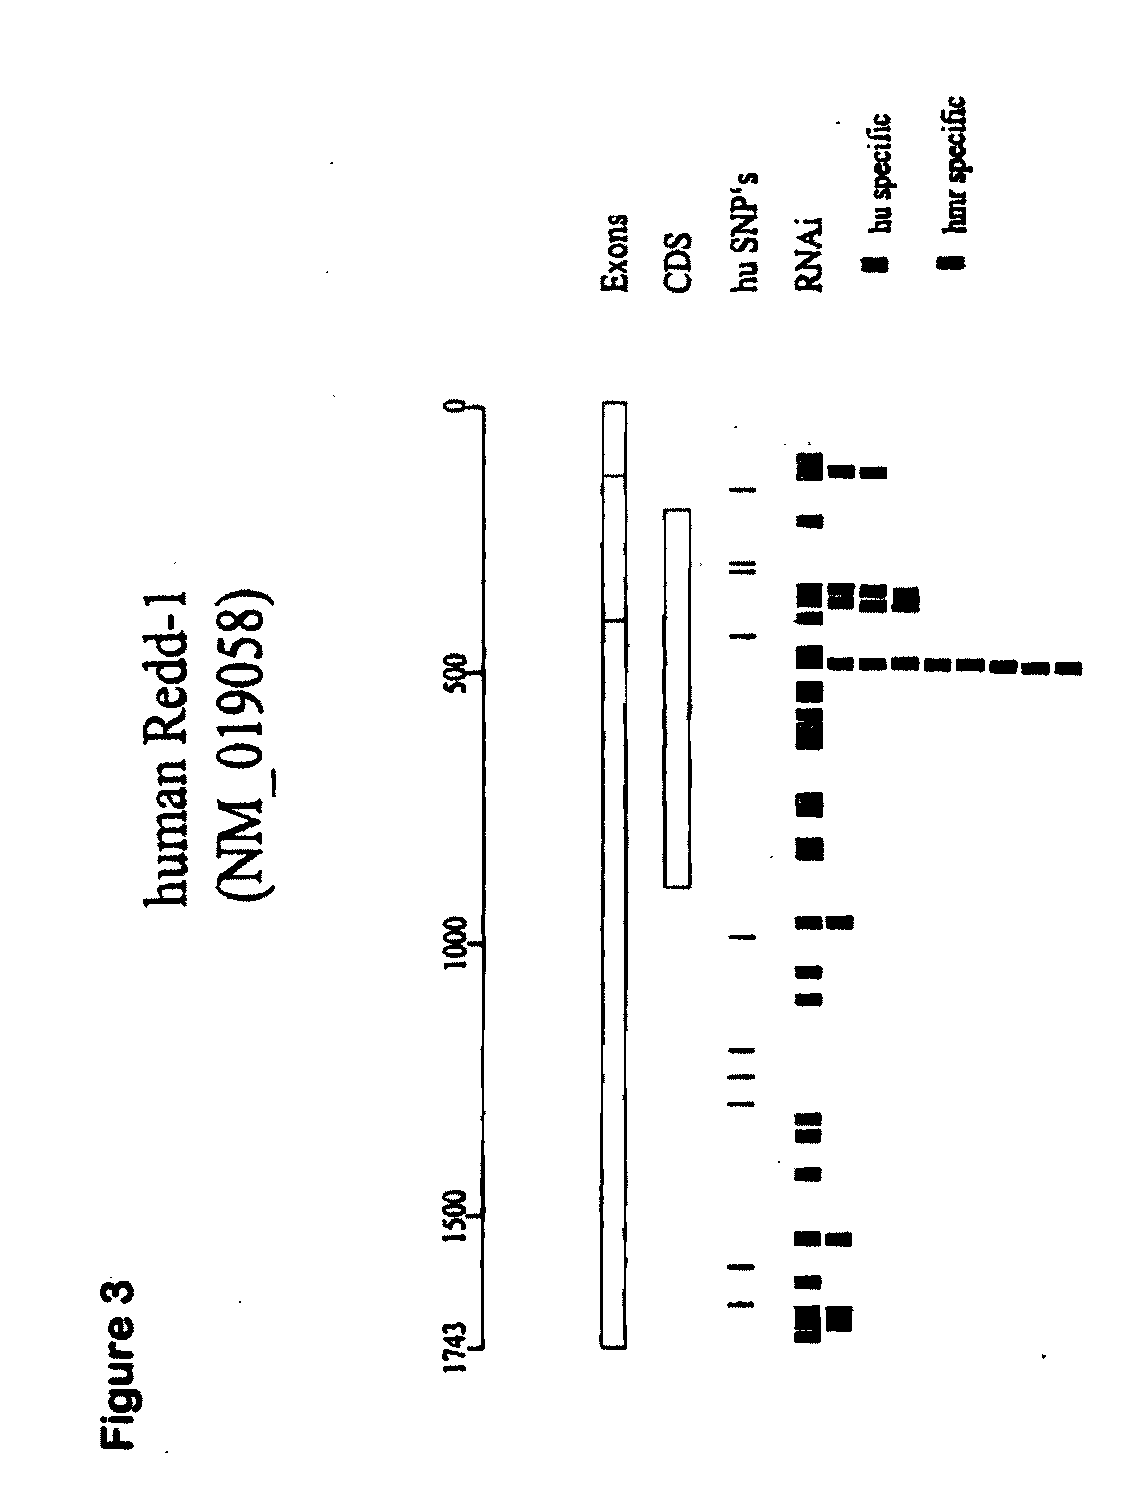 Therapeutic uses of inhibitors of rtp801